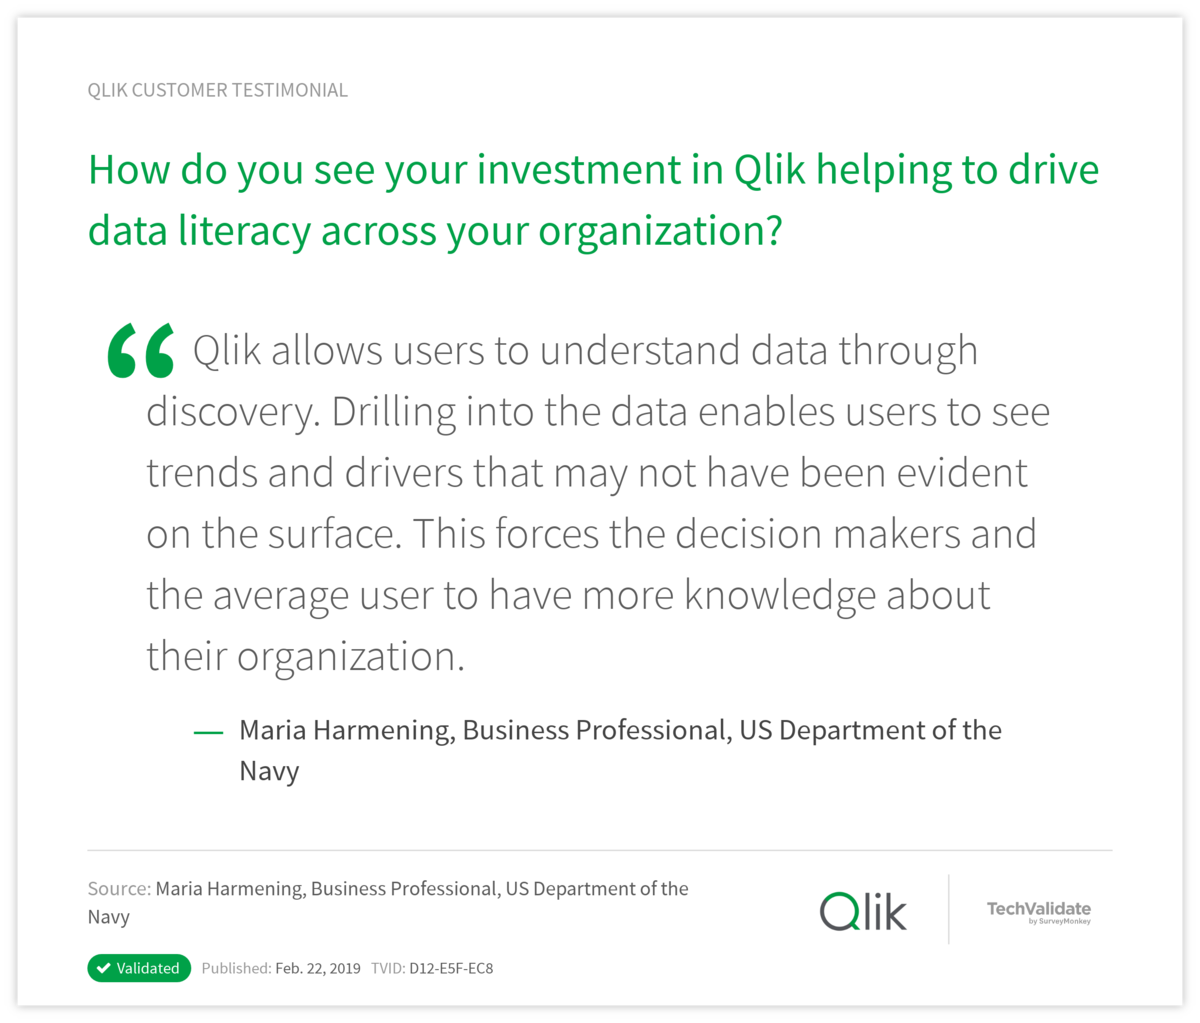 How do you see your investment in Qlik helping to drive data literacy across your organization?